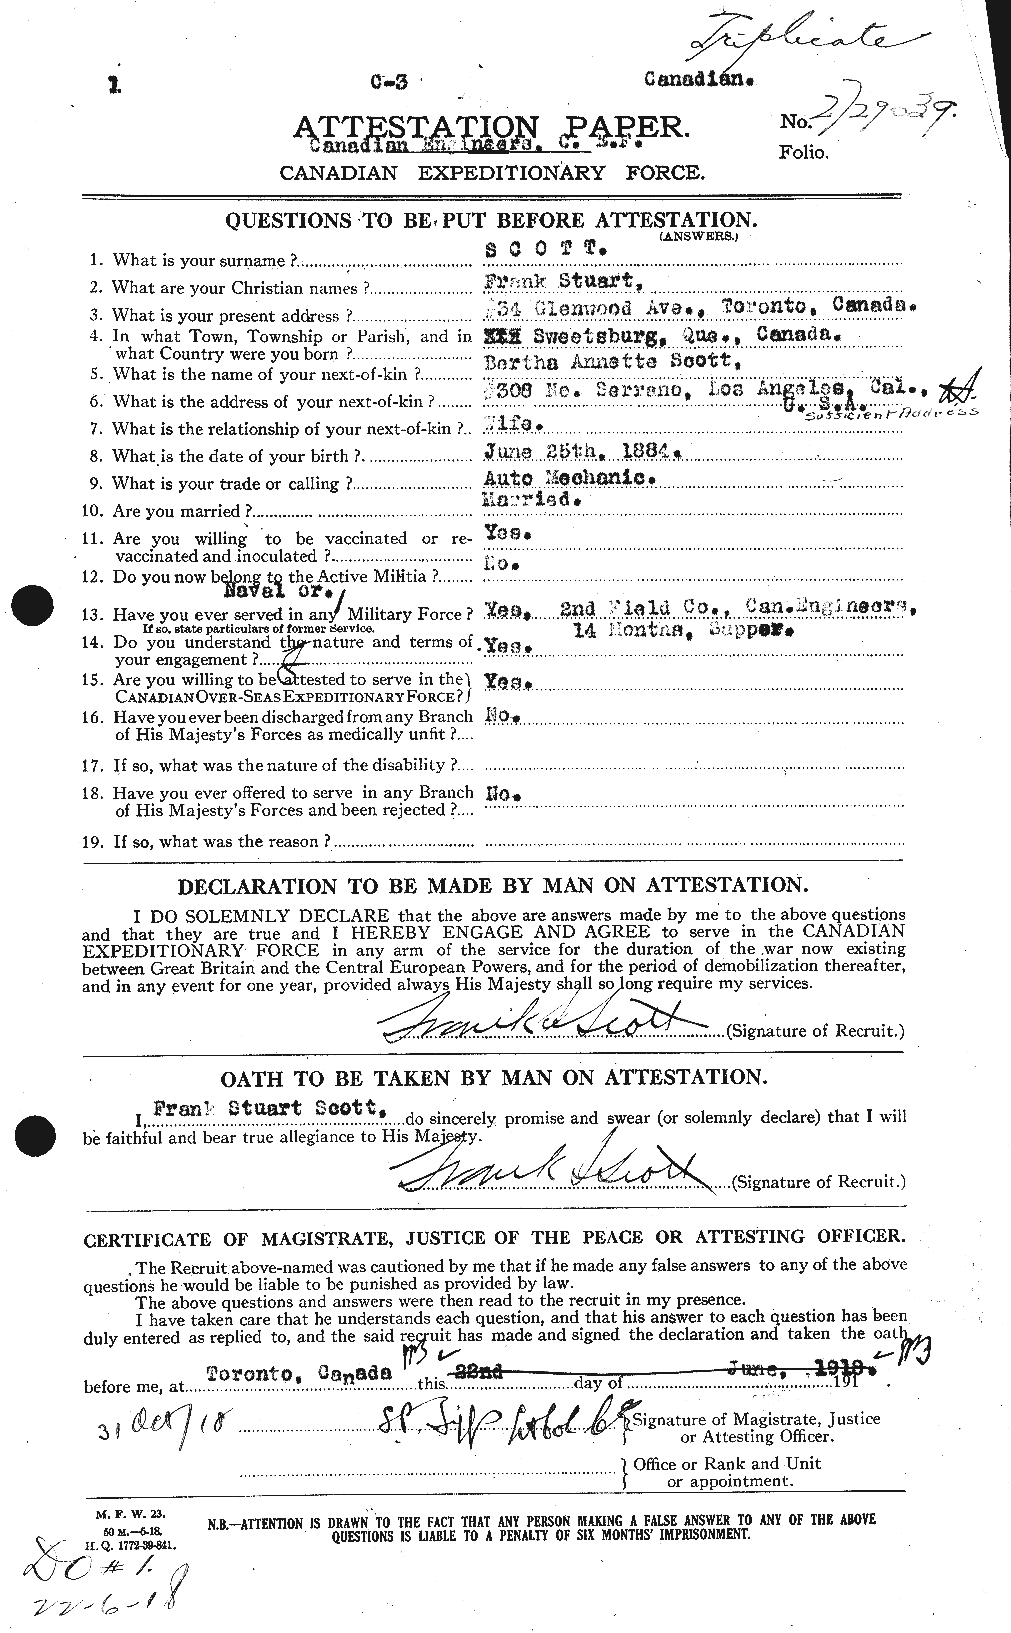 Personnel Records of the First World War - CEF 084690a